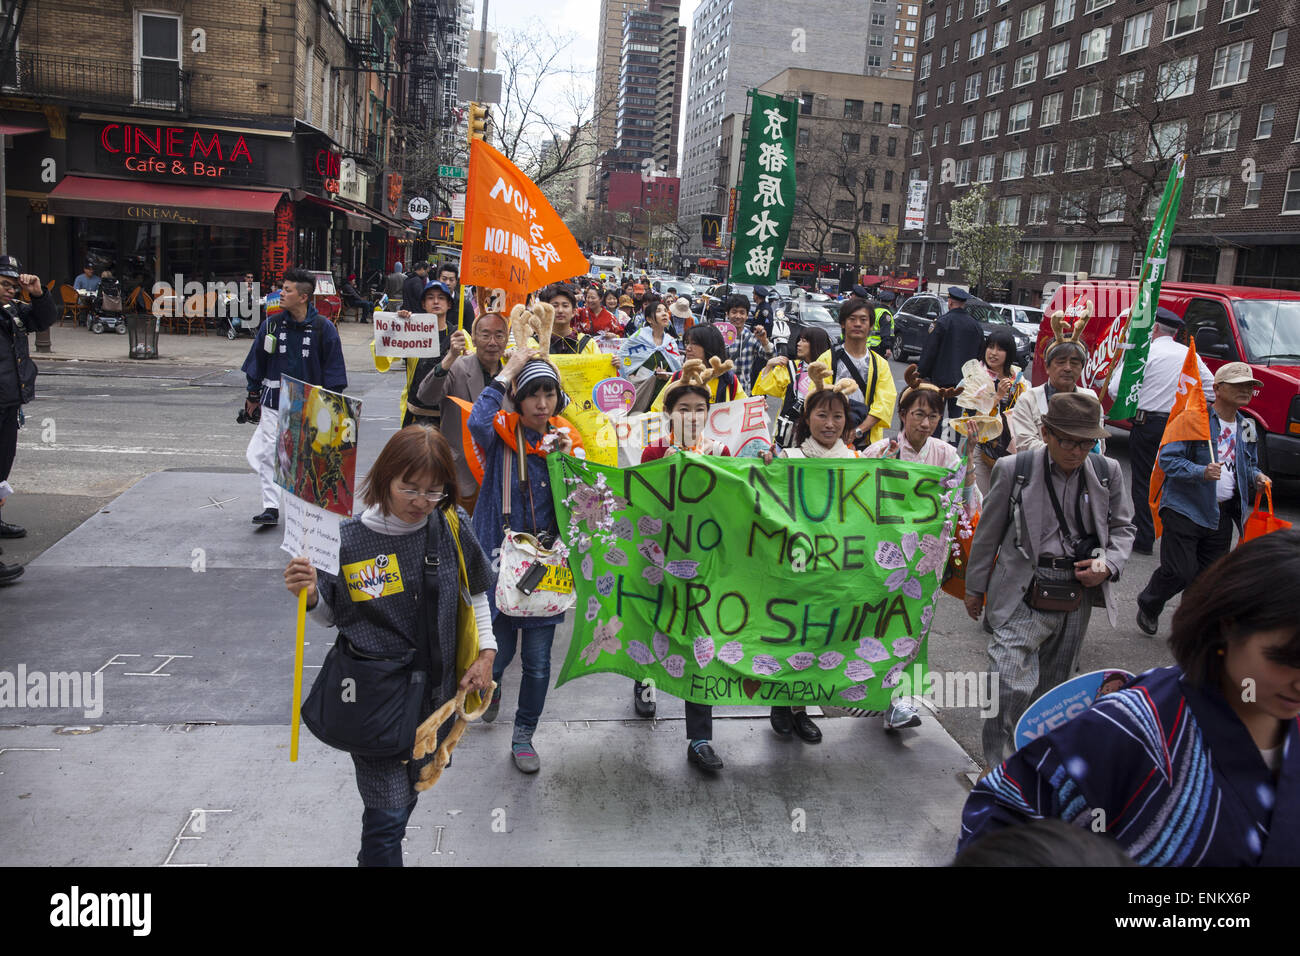 Rally & march for World nuclear disarmament in NYC on the eve of the Conference on the Non-Proliferation of Nuclear Weapons. Ove Stock Photo